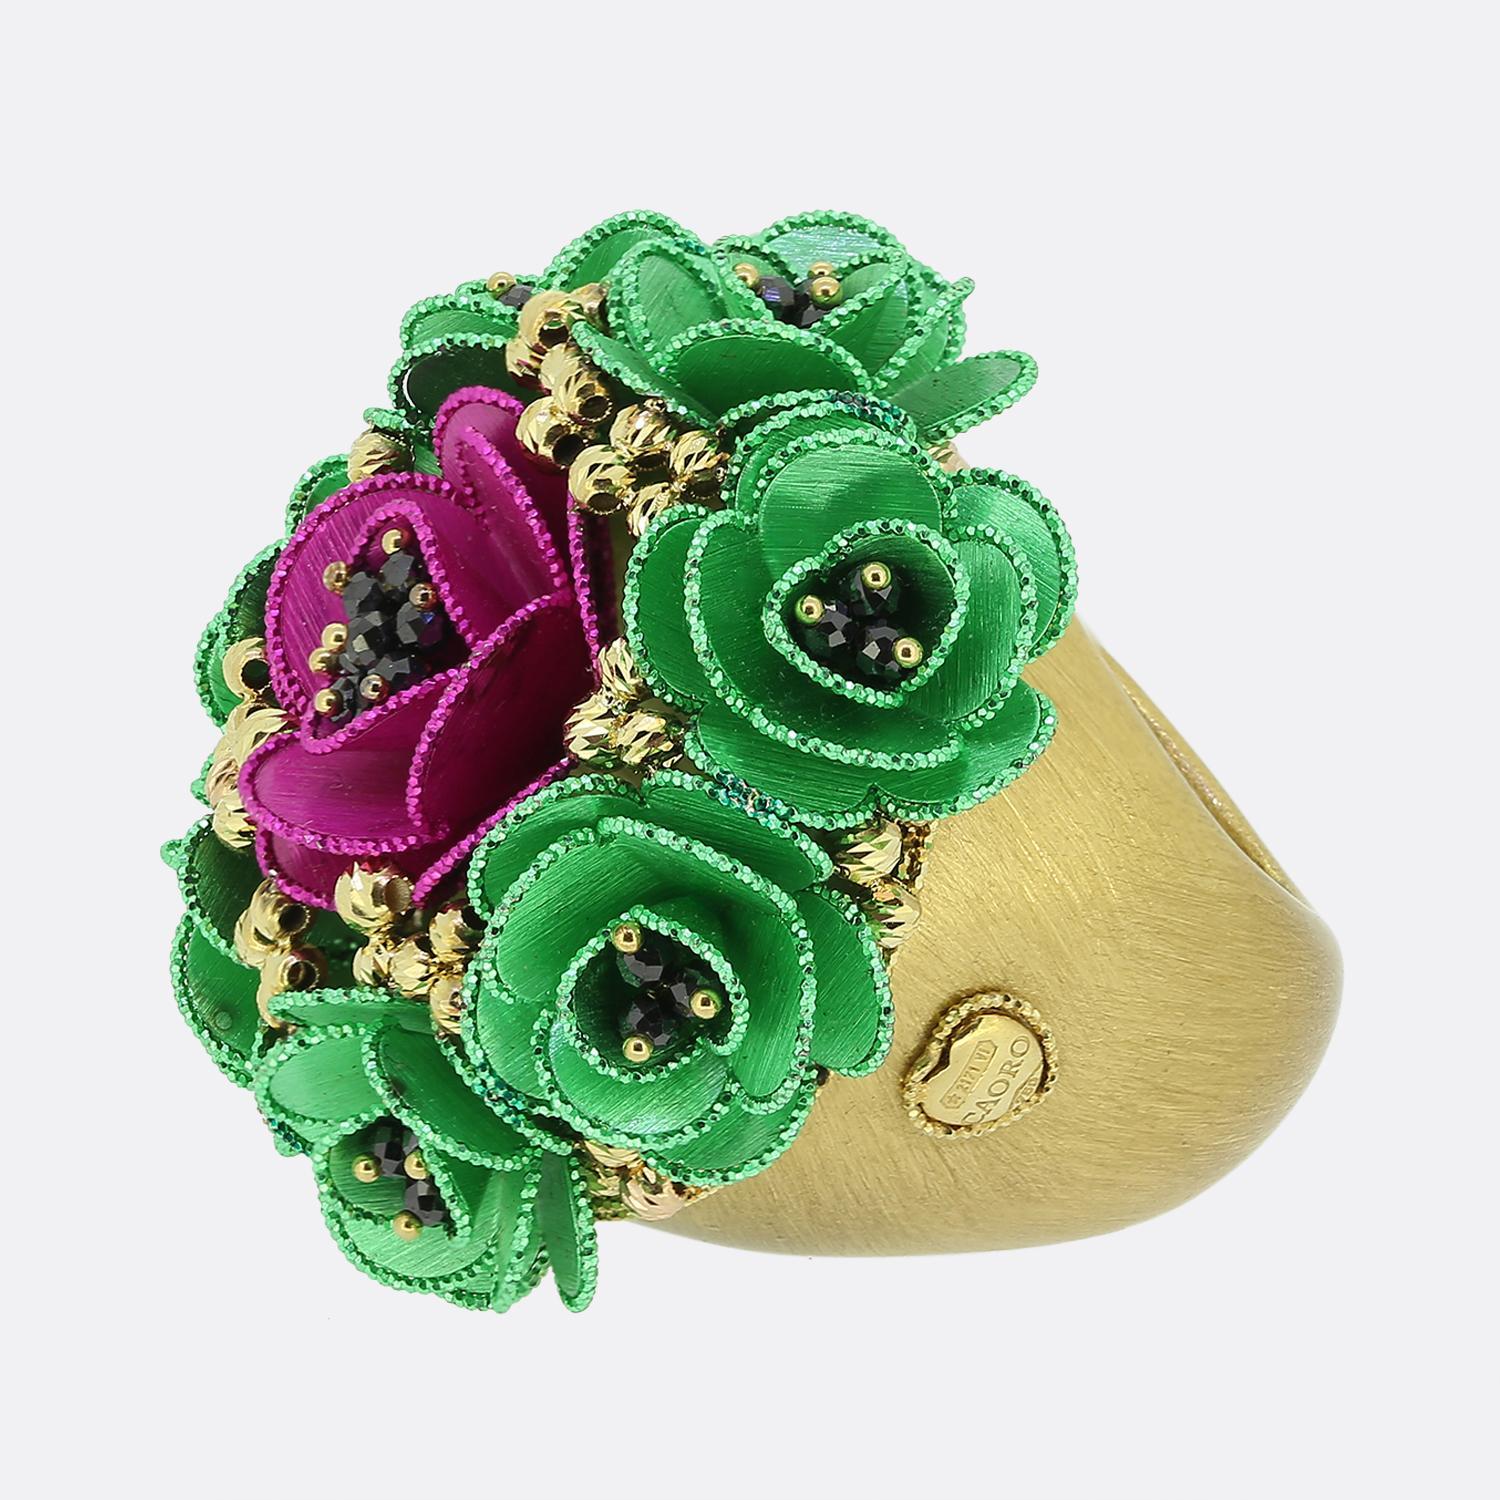 Here we have a fabulous oversized cocktail ring from the renowned unique Italian jewellery designer, Caoro. This piece has been crafted from 18ct yellow gold and forms part of their Bouquet collection. An electroformed gold band plays host to a wide